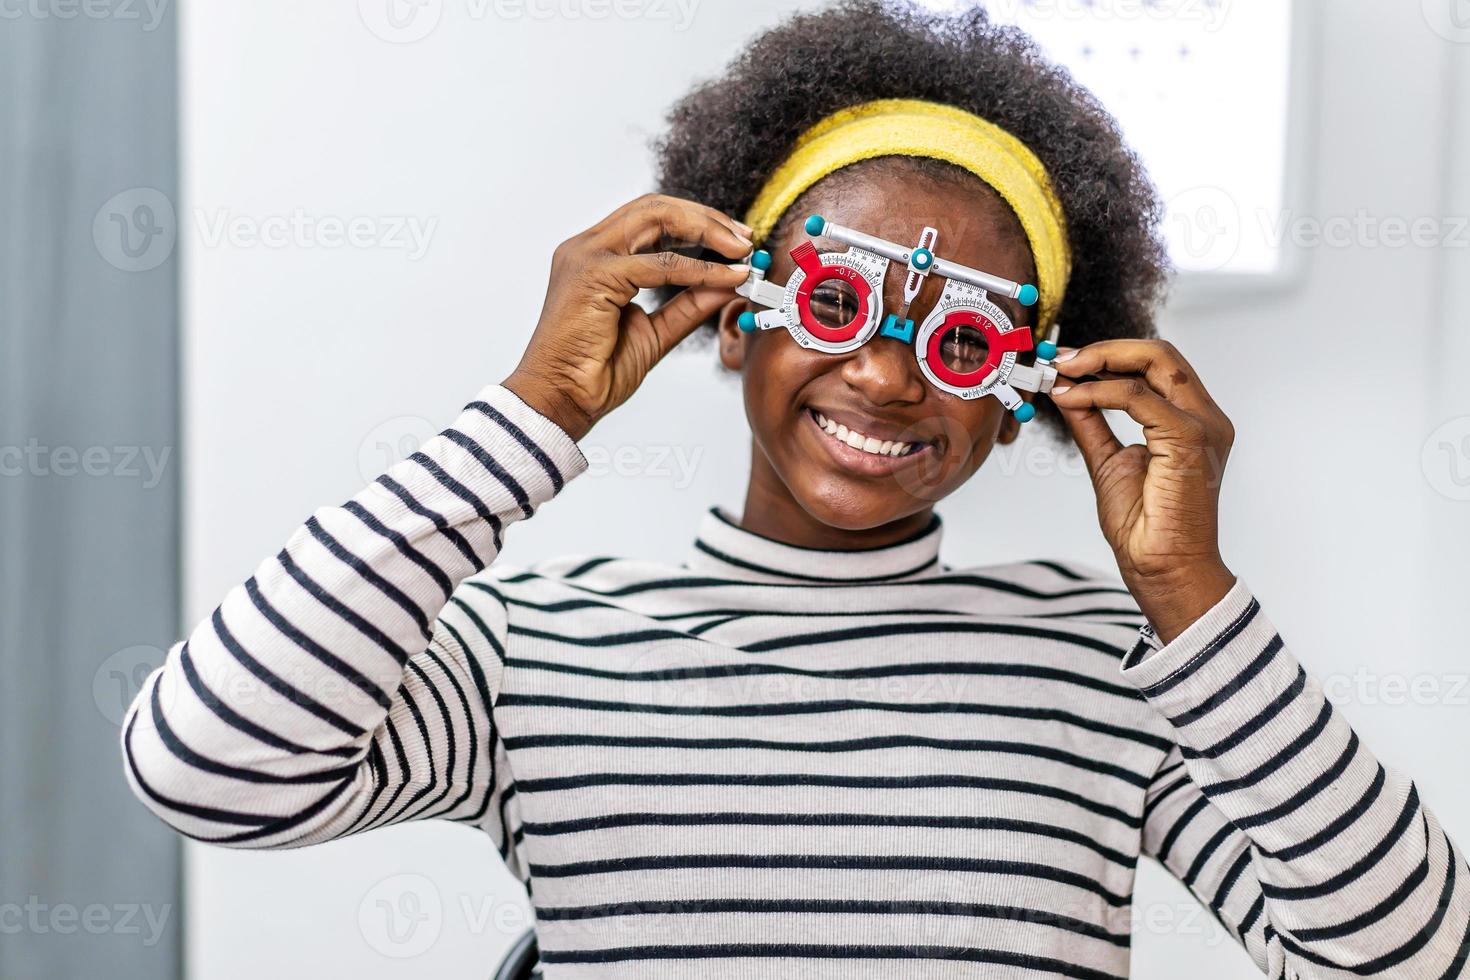 Smiling young woman african american checking vision with eye test glasses during a medical examination at the ophthalmological office, Checking eye vision by optician health examination concept photo